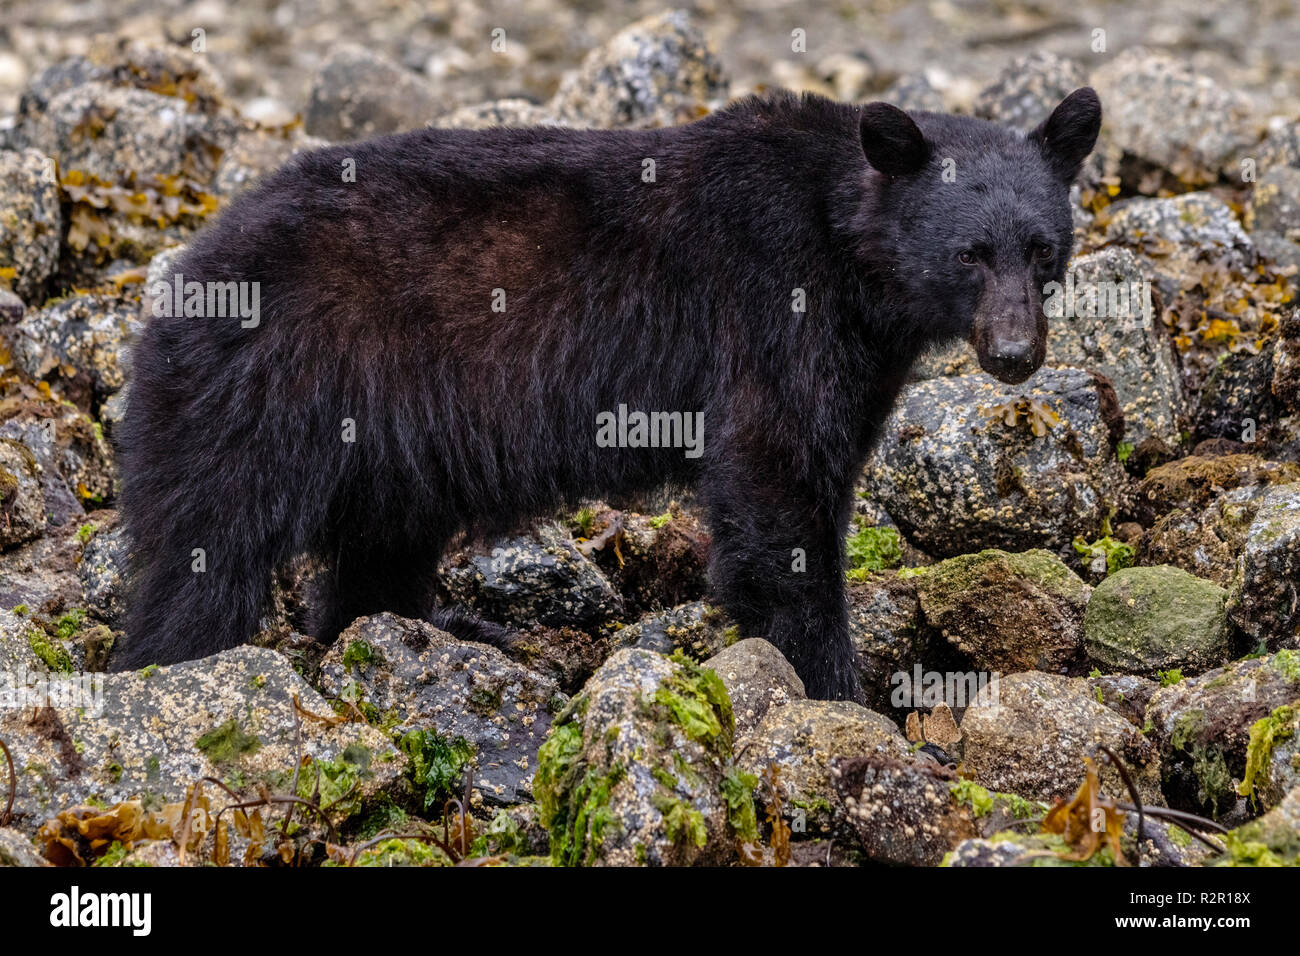 American black bear (Ursus americanus) foraging along the shoreline during low tide in The Broughton Archipelago, Great Bear Rainforest, First Nations Territory, British Columbia, Canada Stock Photo